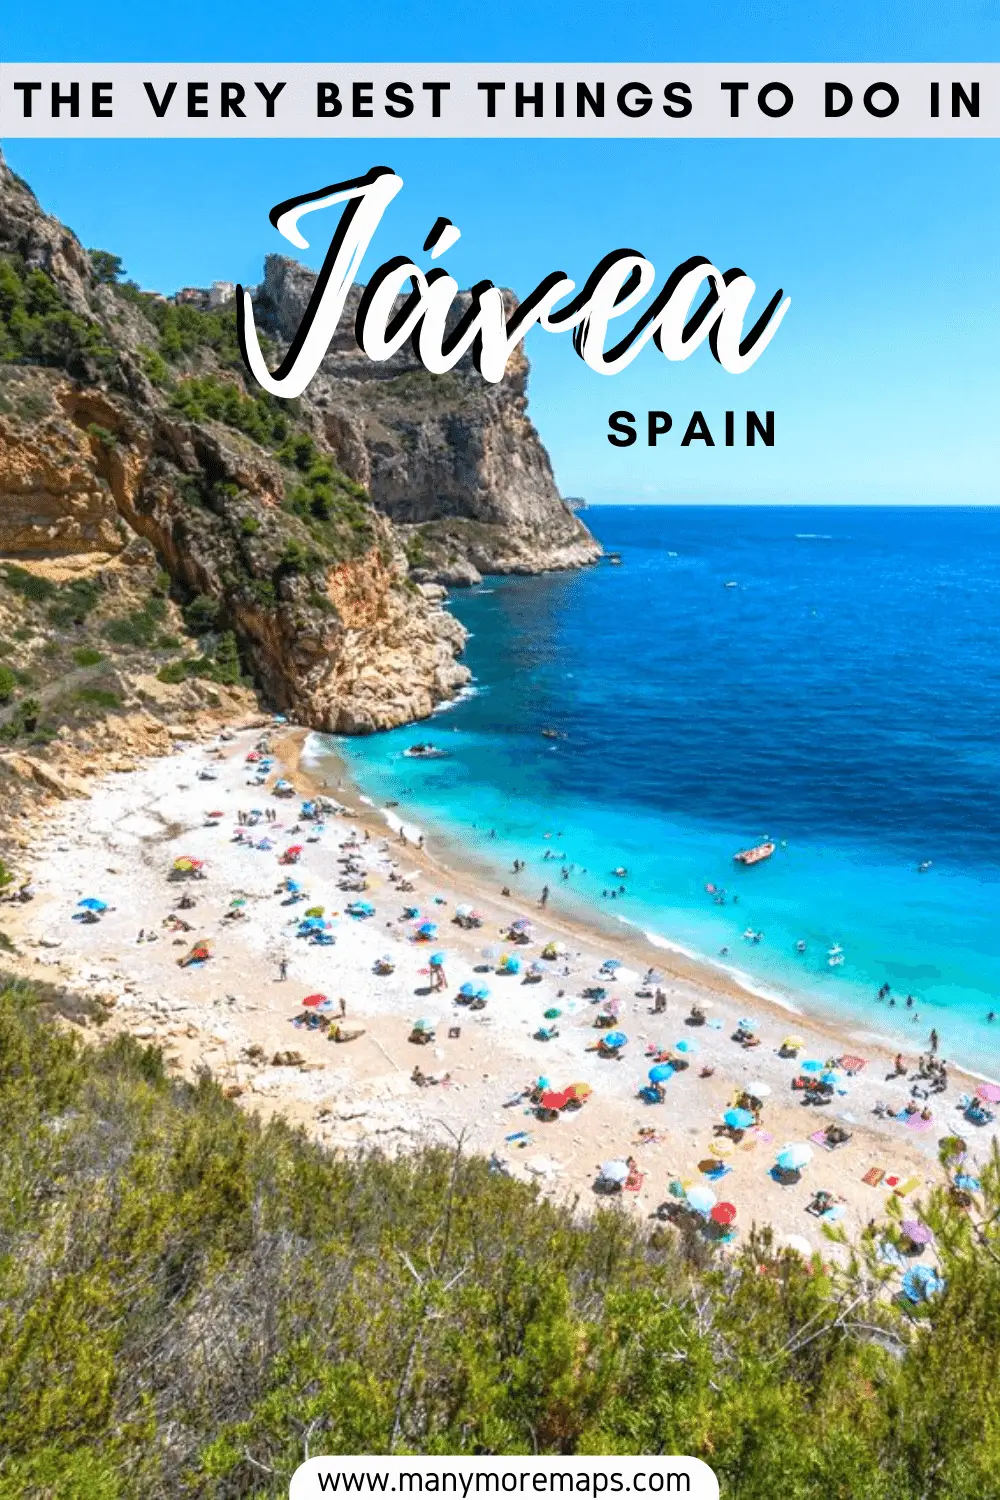 If you're planning your Spain travel itinerary you should definitely consider adding the town of Javea, which is on the Costa Blanca! Here are the very best things to do and places to visit in Javea, including some of the most beautiful beaches in Spain!